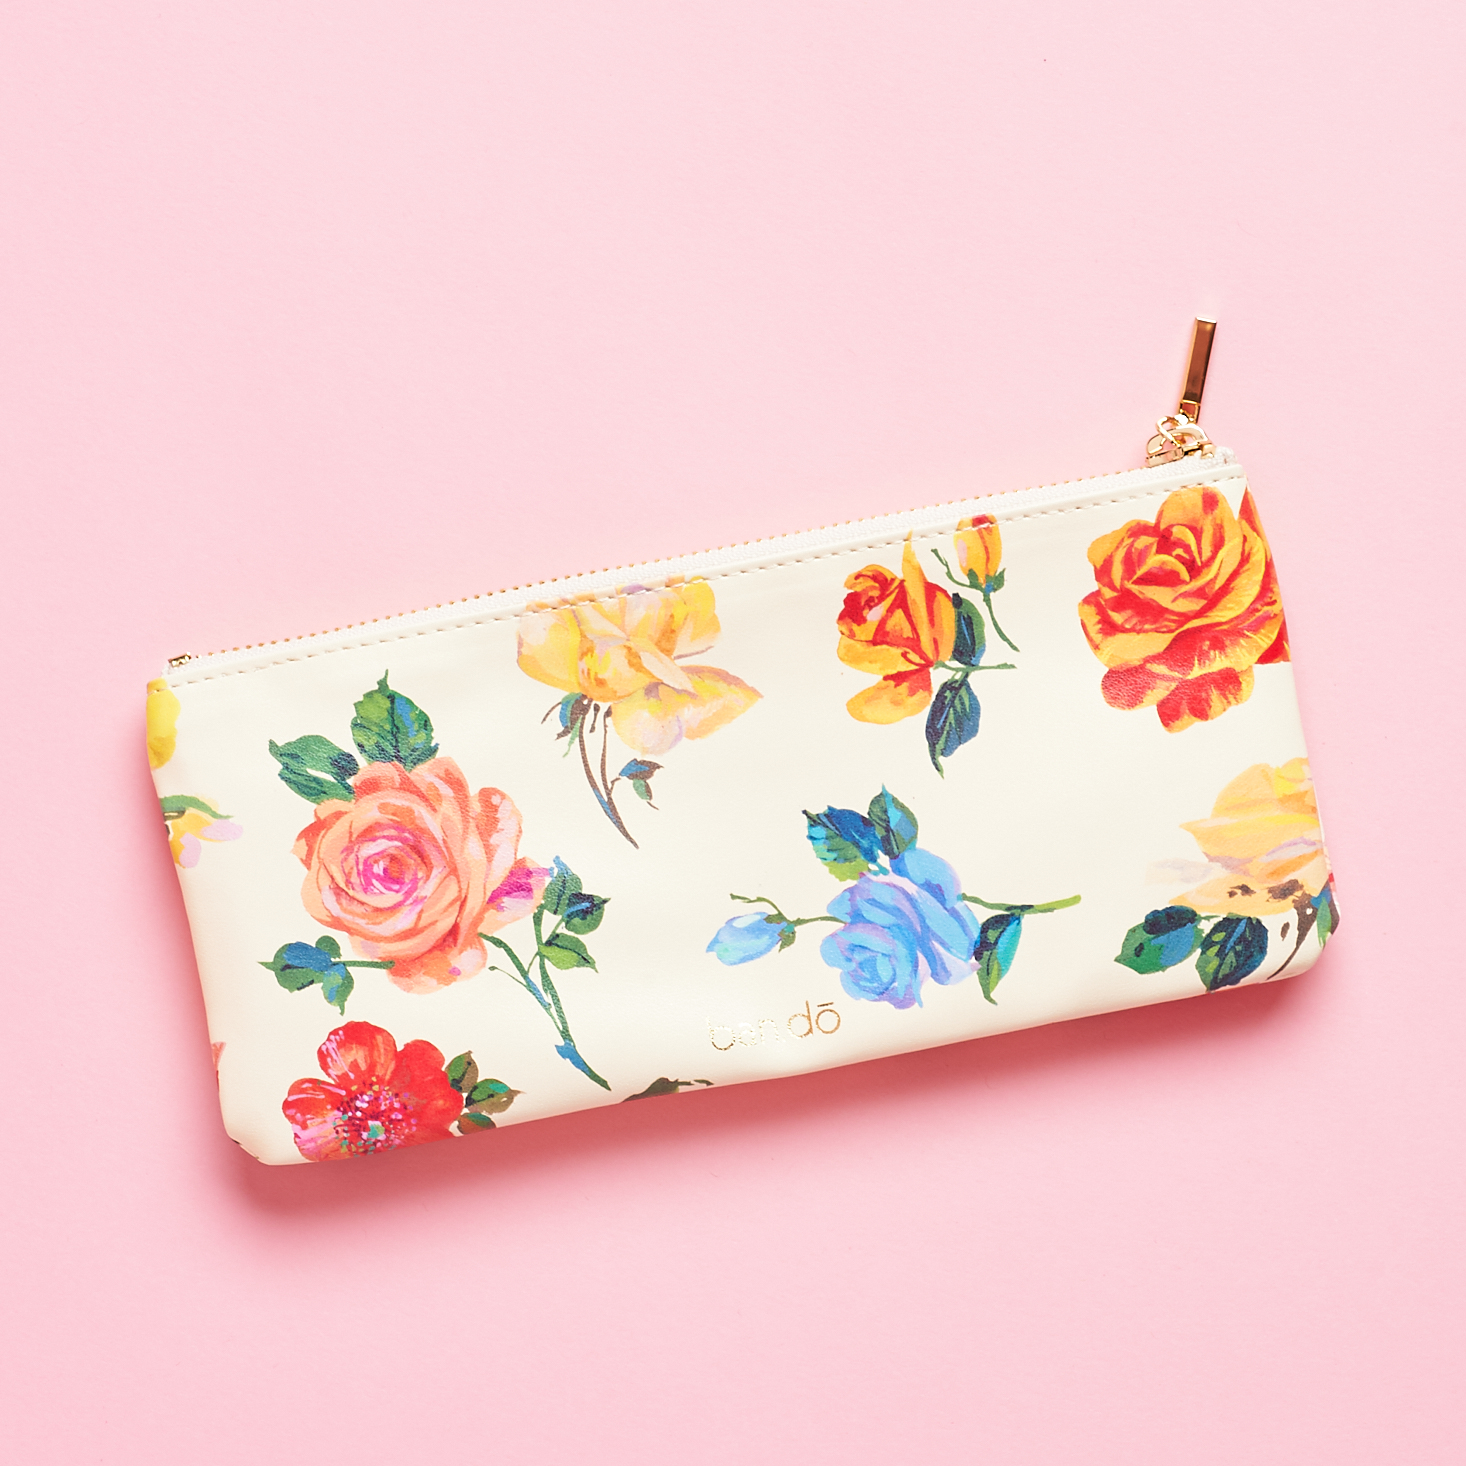 Other side of Ban.do Floral Pencil Pouch